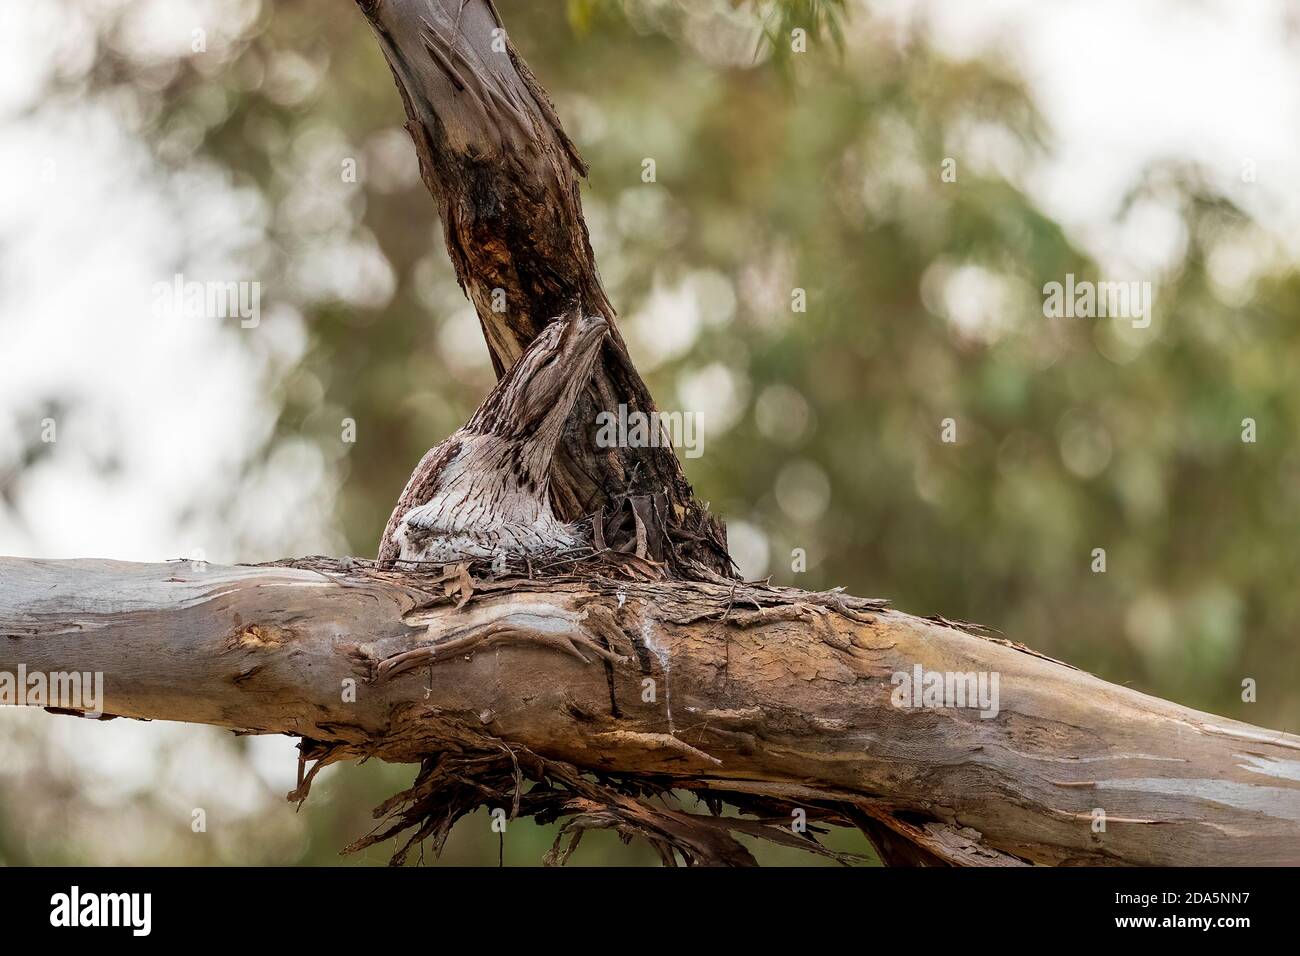 A big-headed stocky Australian native bird known as a Tawny Frogmouth (Podargus strigoides) seated on a nest made of of twigs. Stock Photo